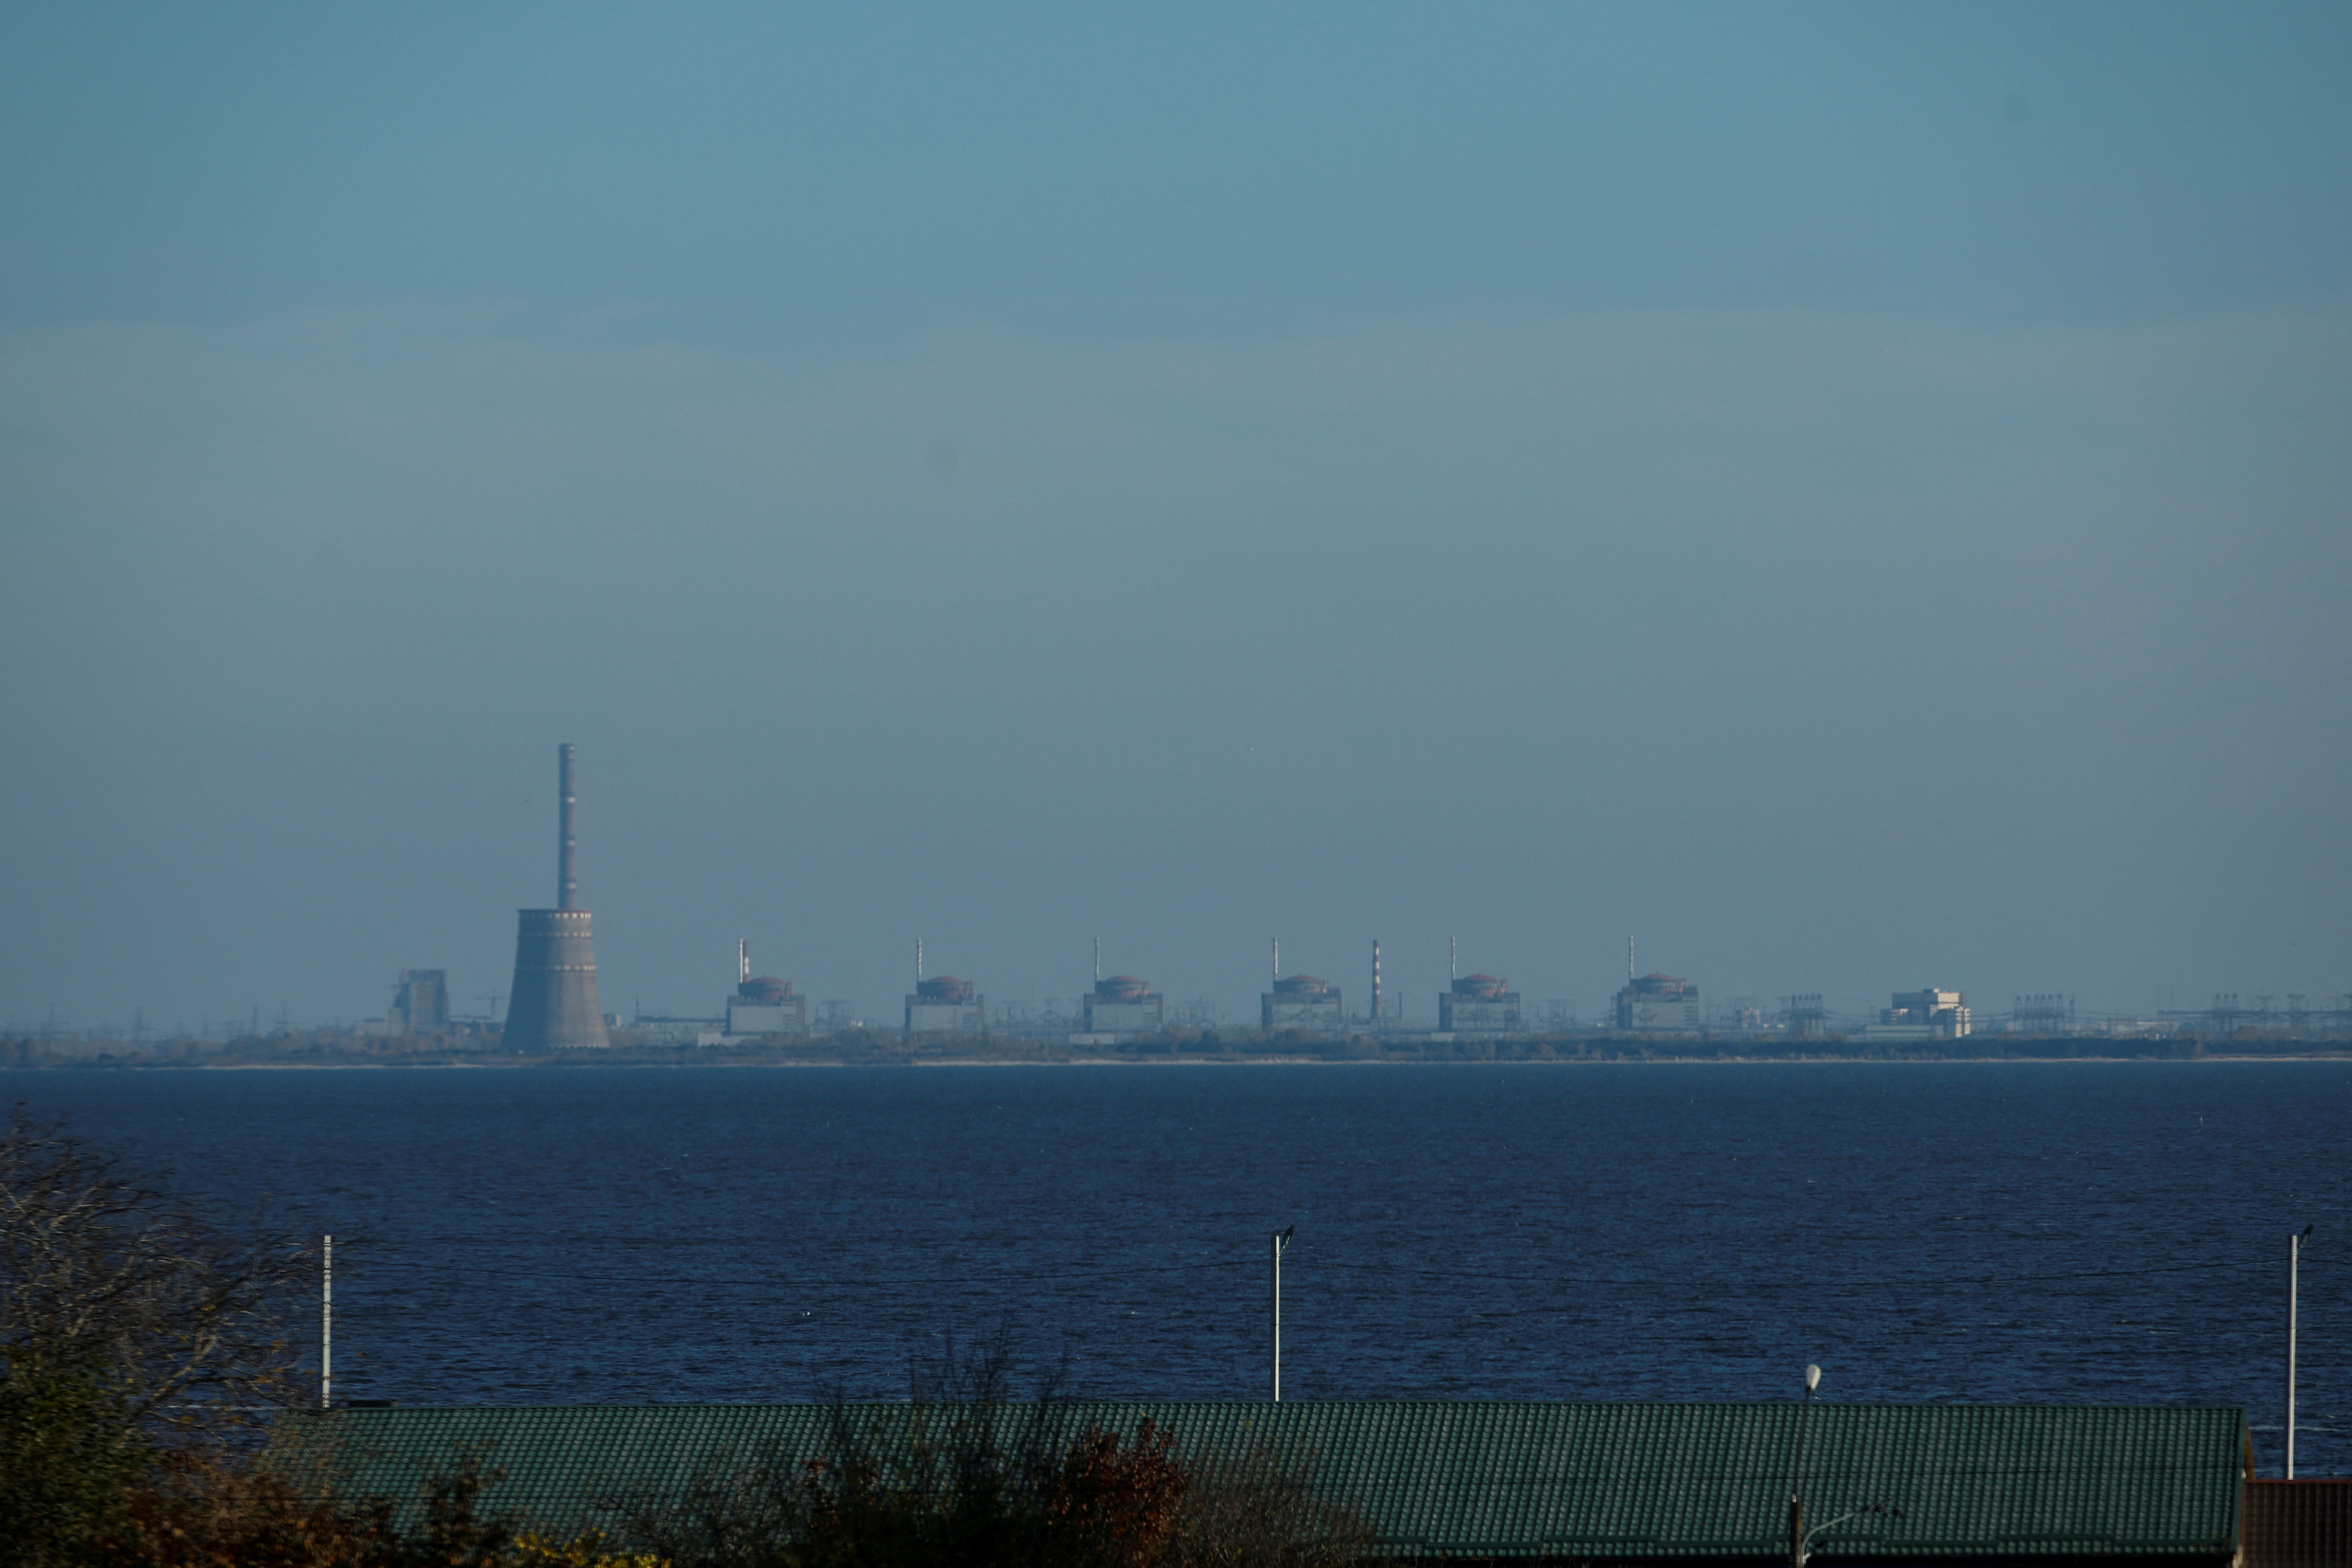 The show shows the Zaporizhia nuclear power plant from the city of Nikopol